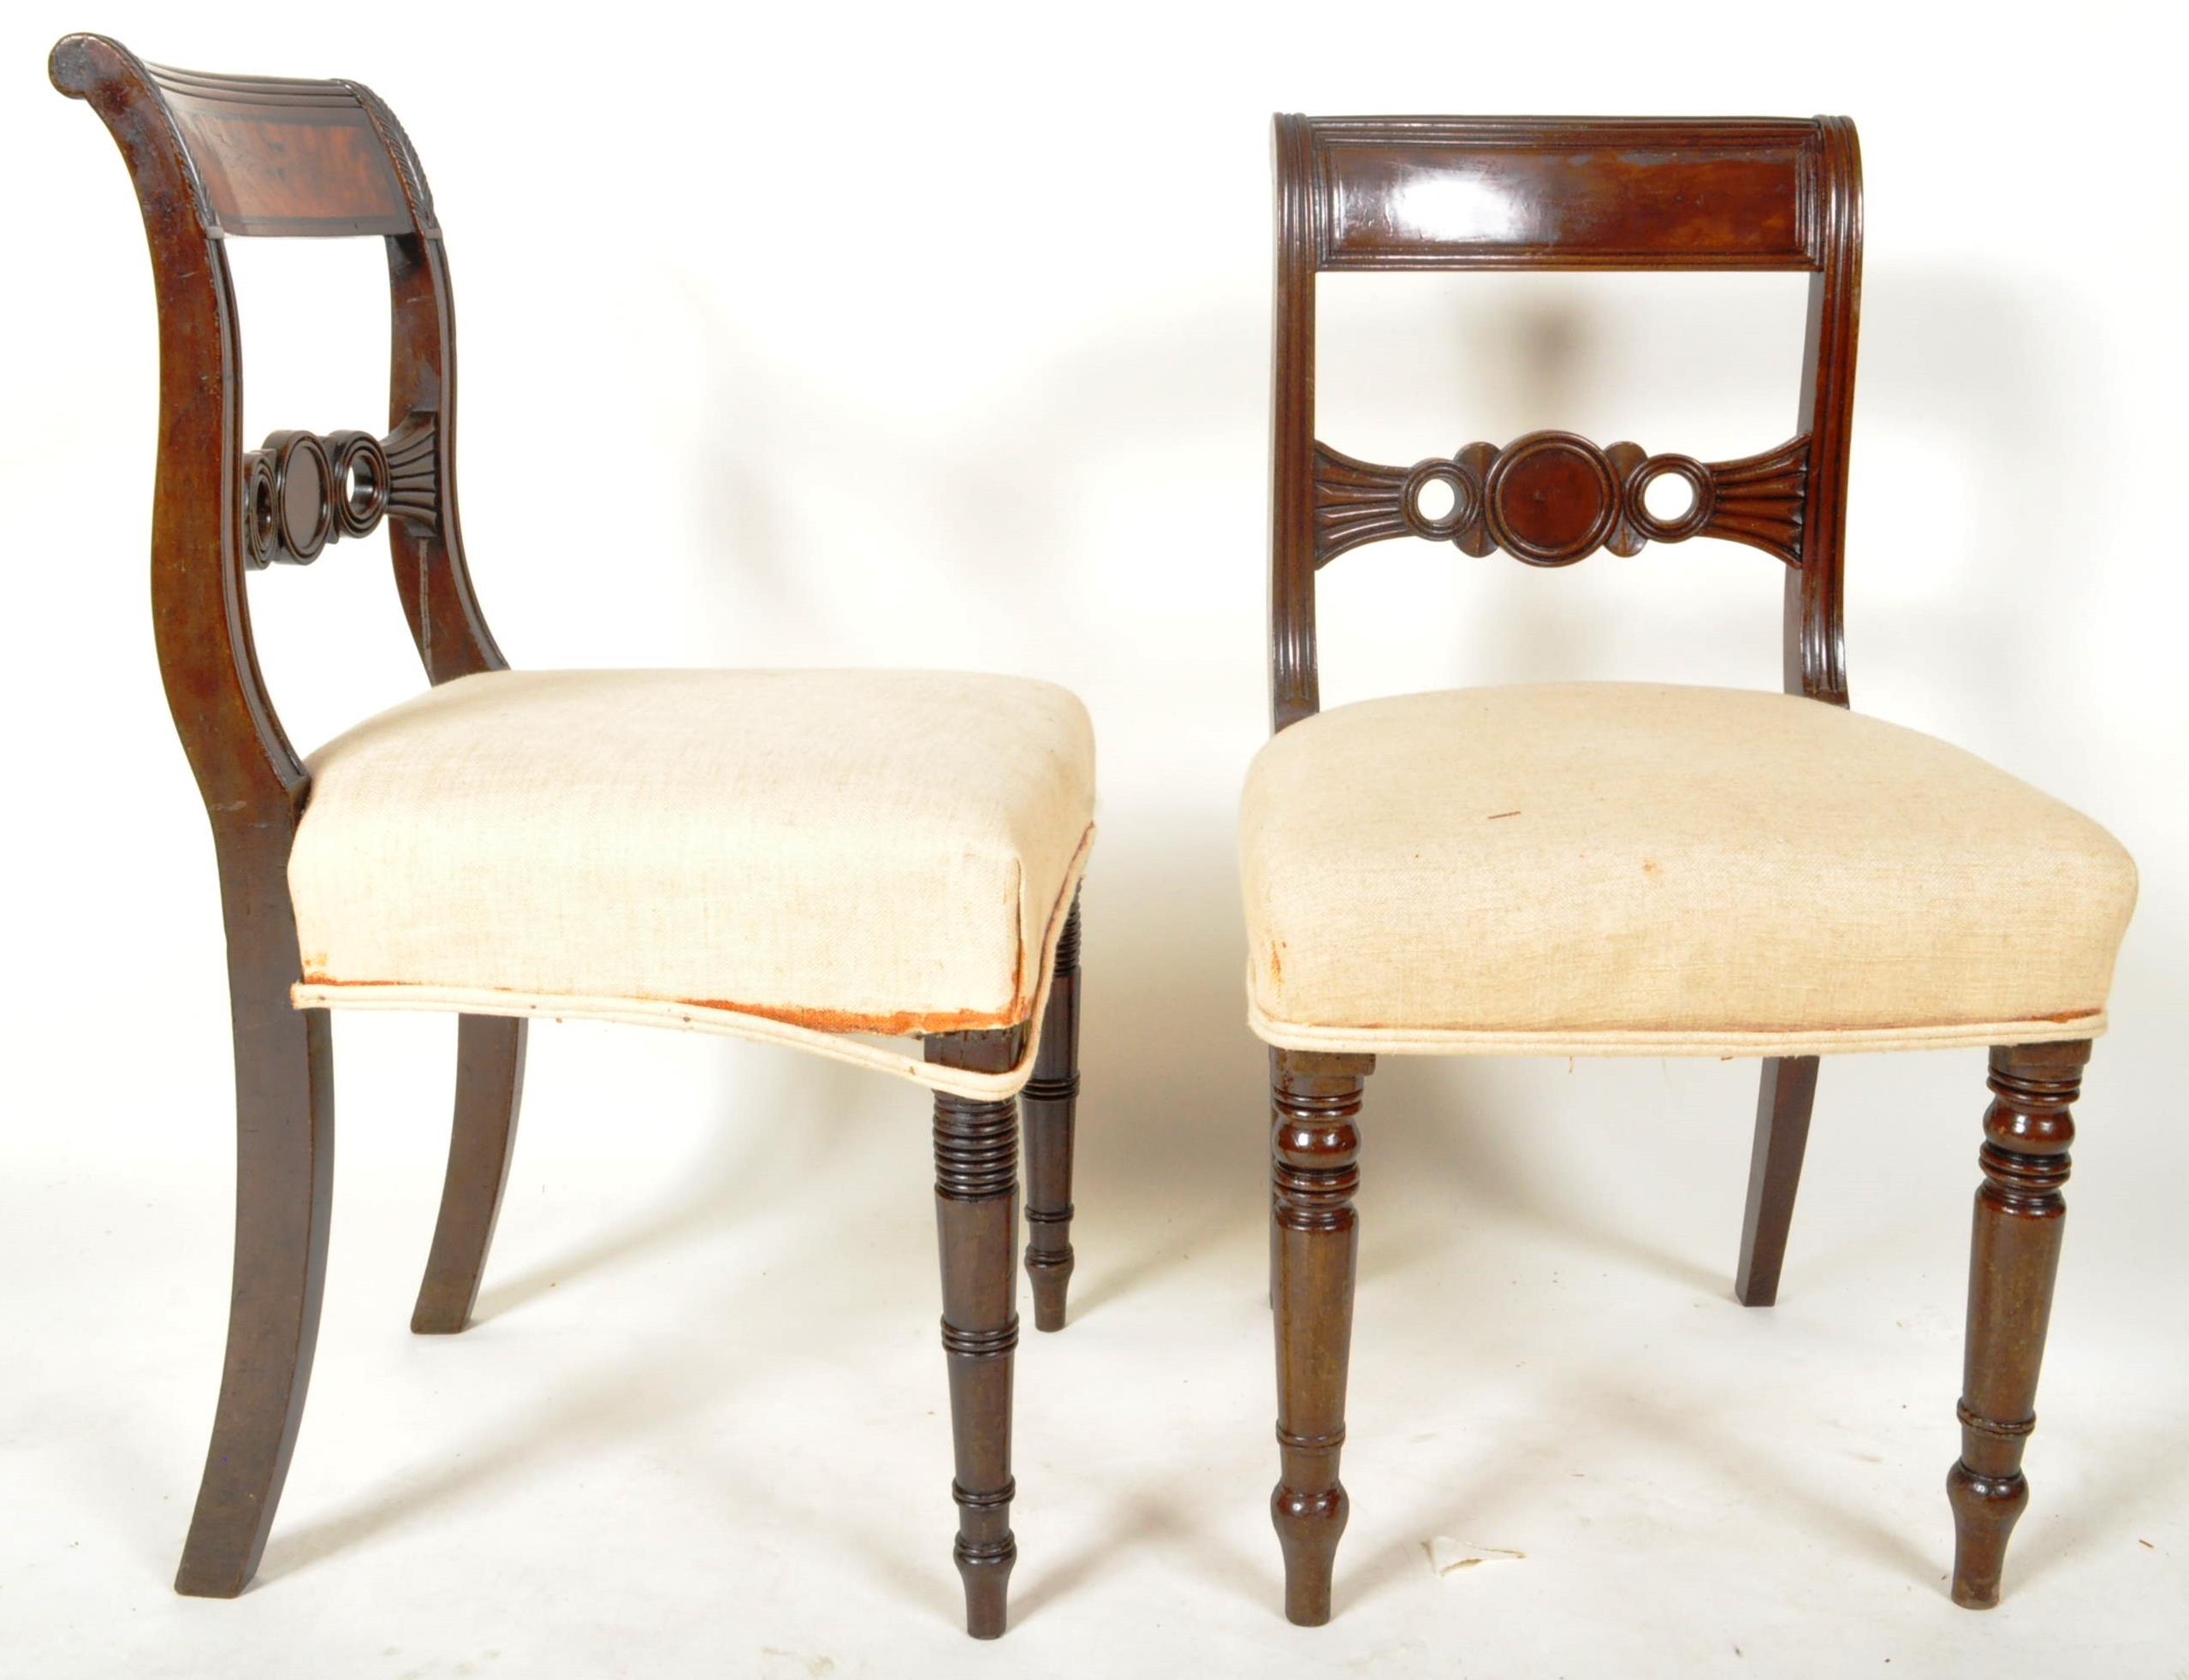 SET OF FIVE GILLOWS MANNER BAR BACK DINING CHAIRS - Image 4 of 8